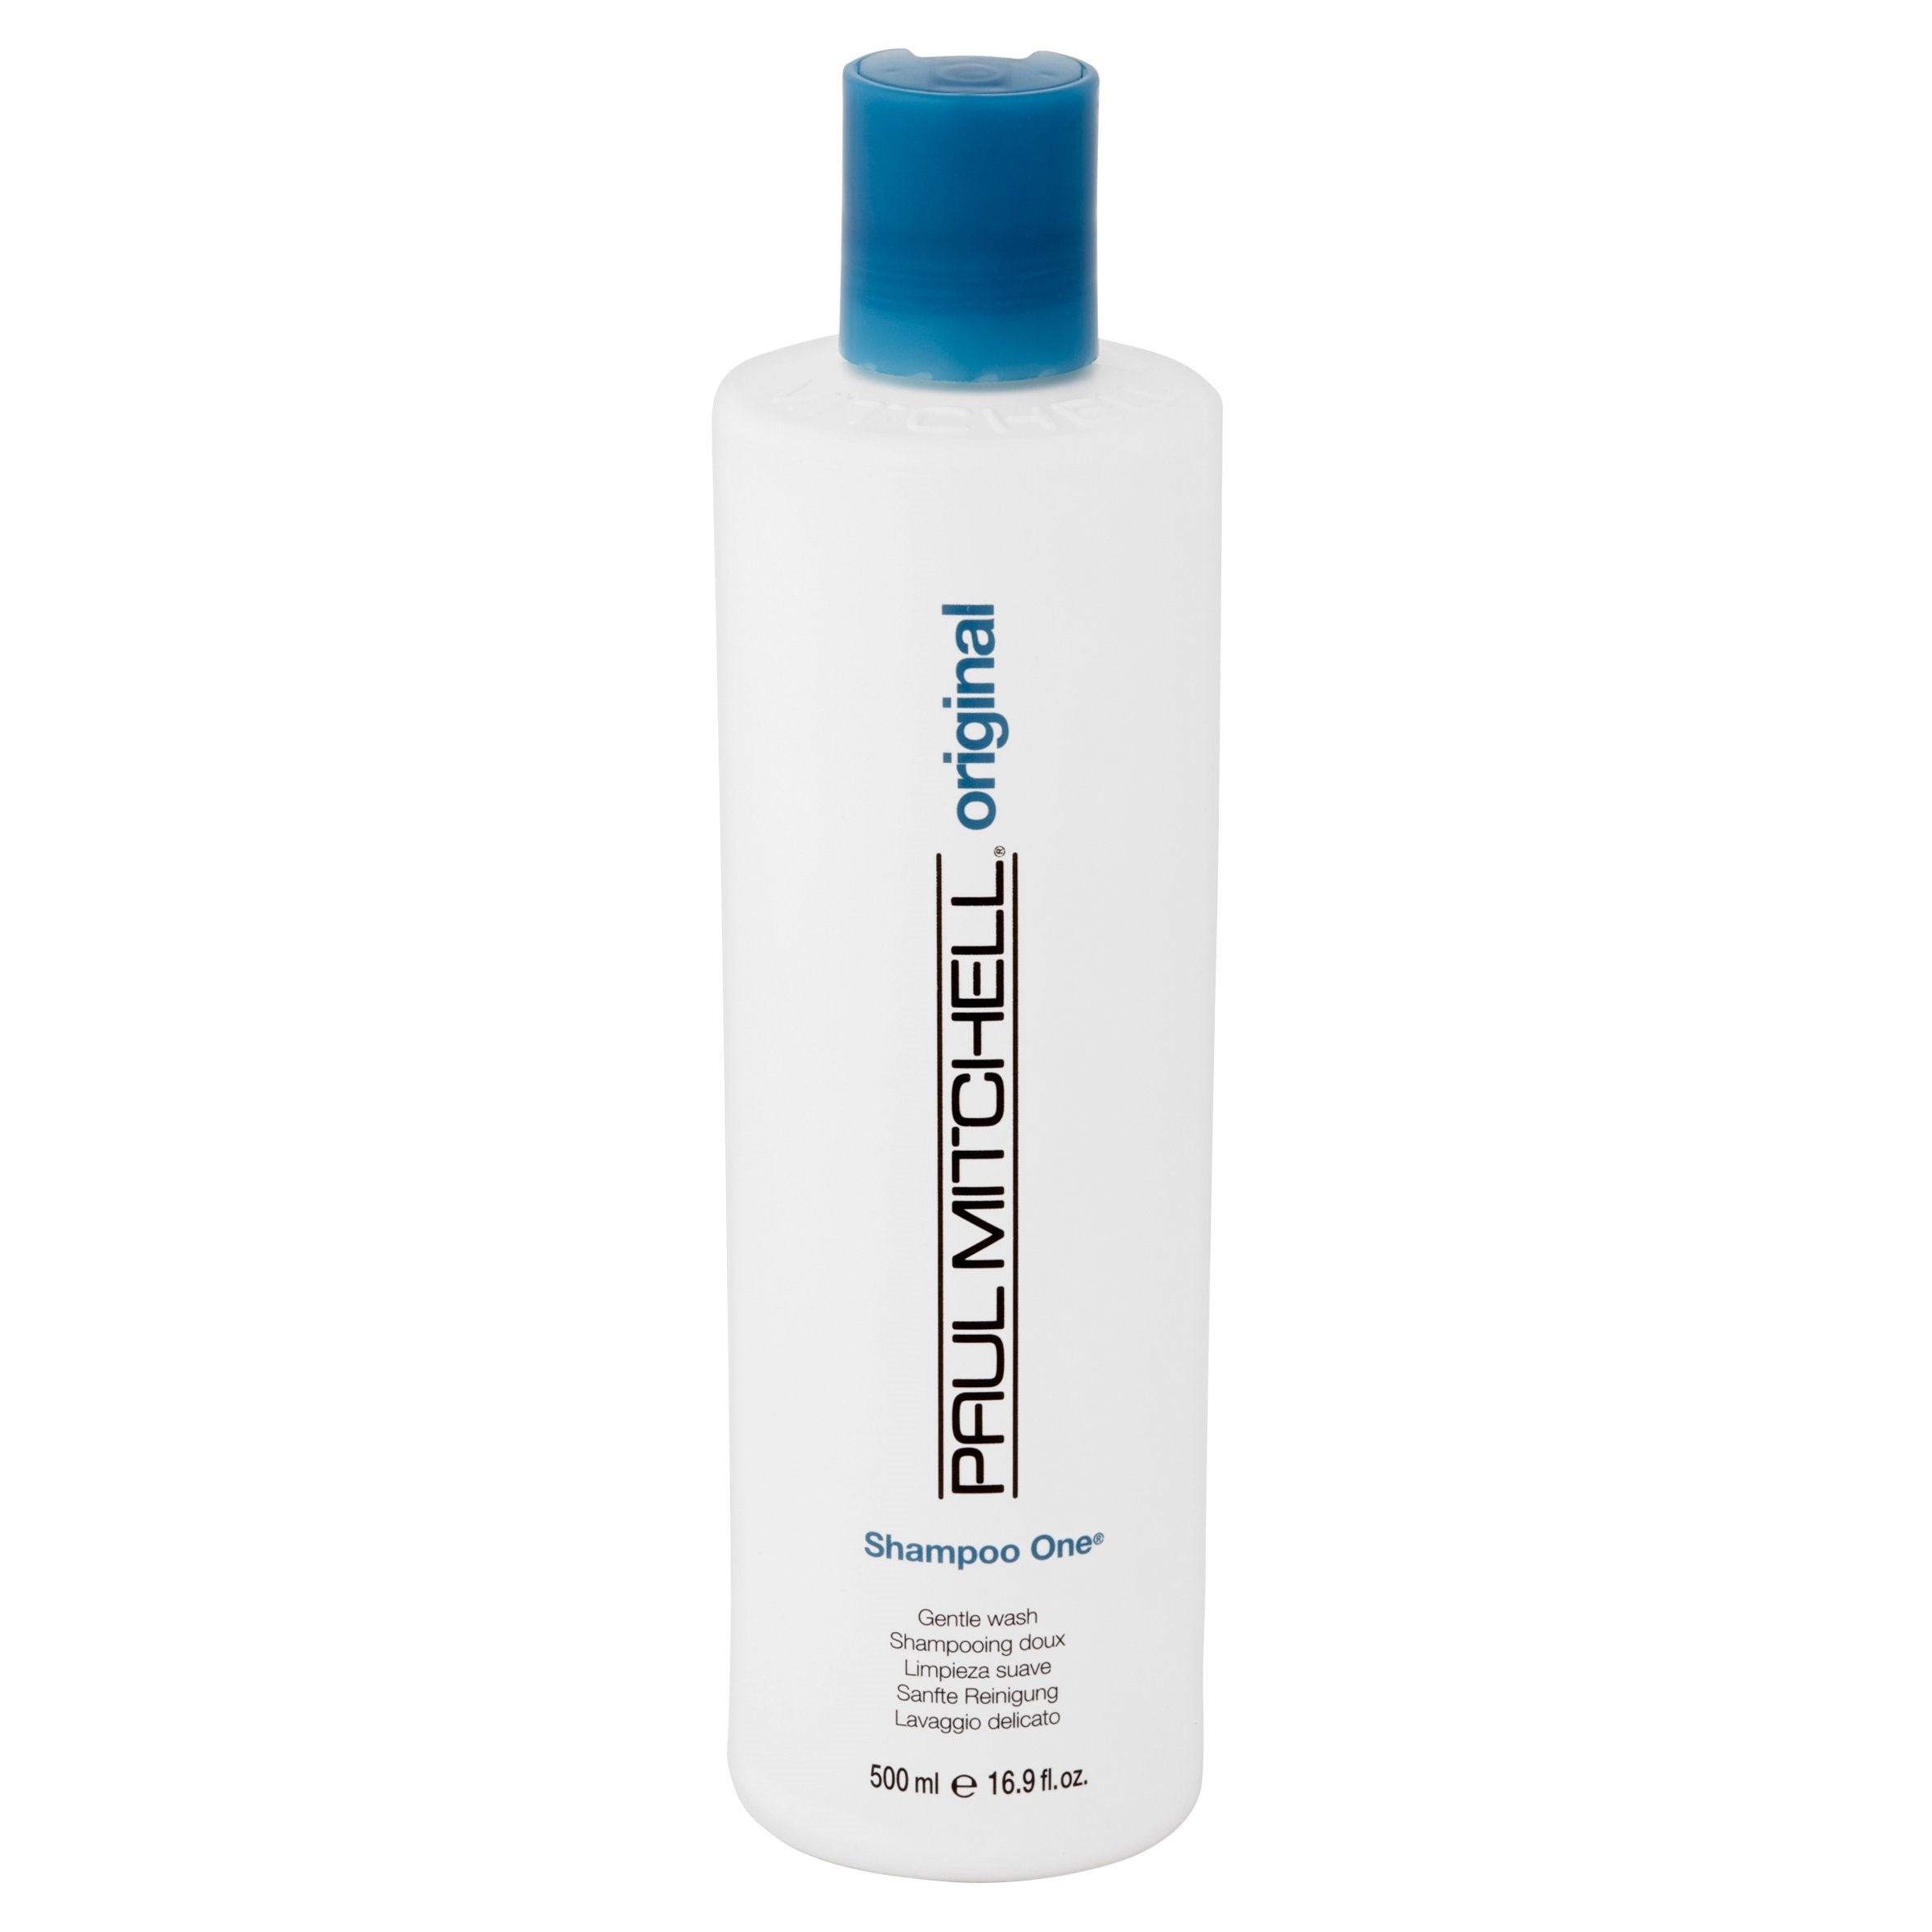 Paul Mitchell Original Dandruff Relief Color Protection Daily Shampoo, 16.9 fl oz - image 2 of 2